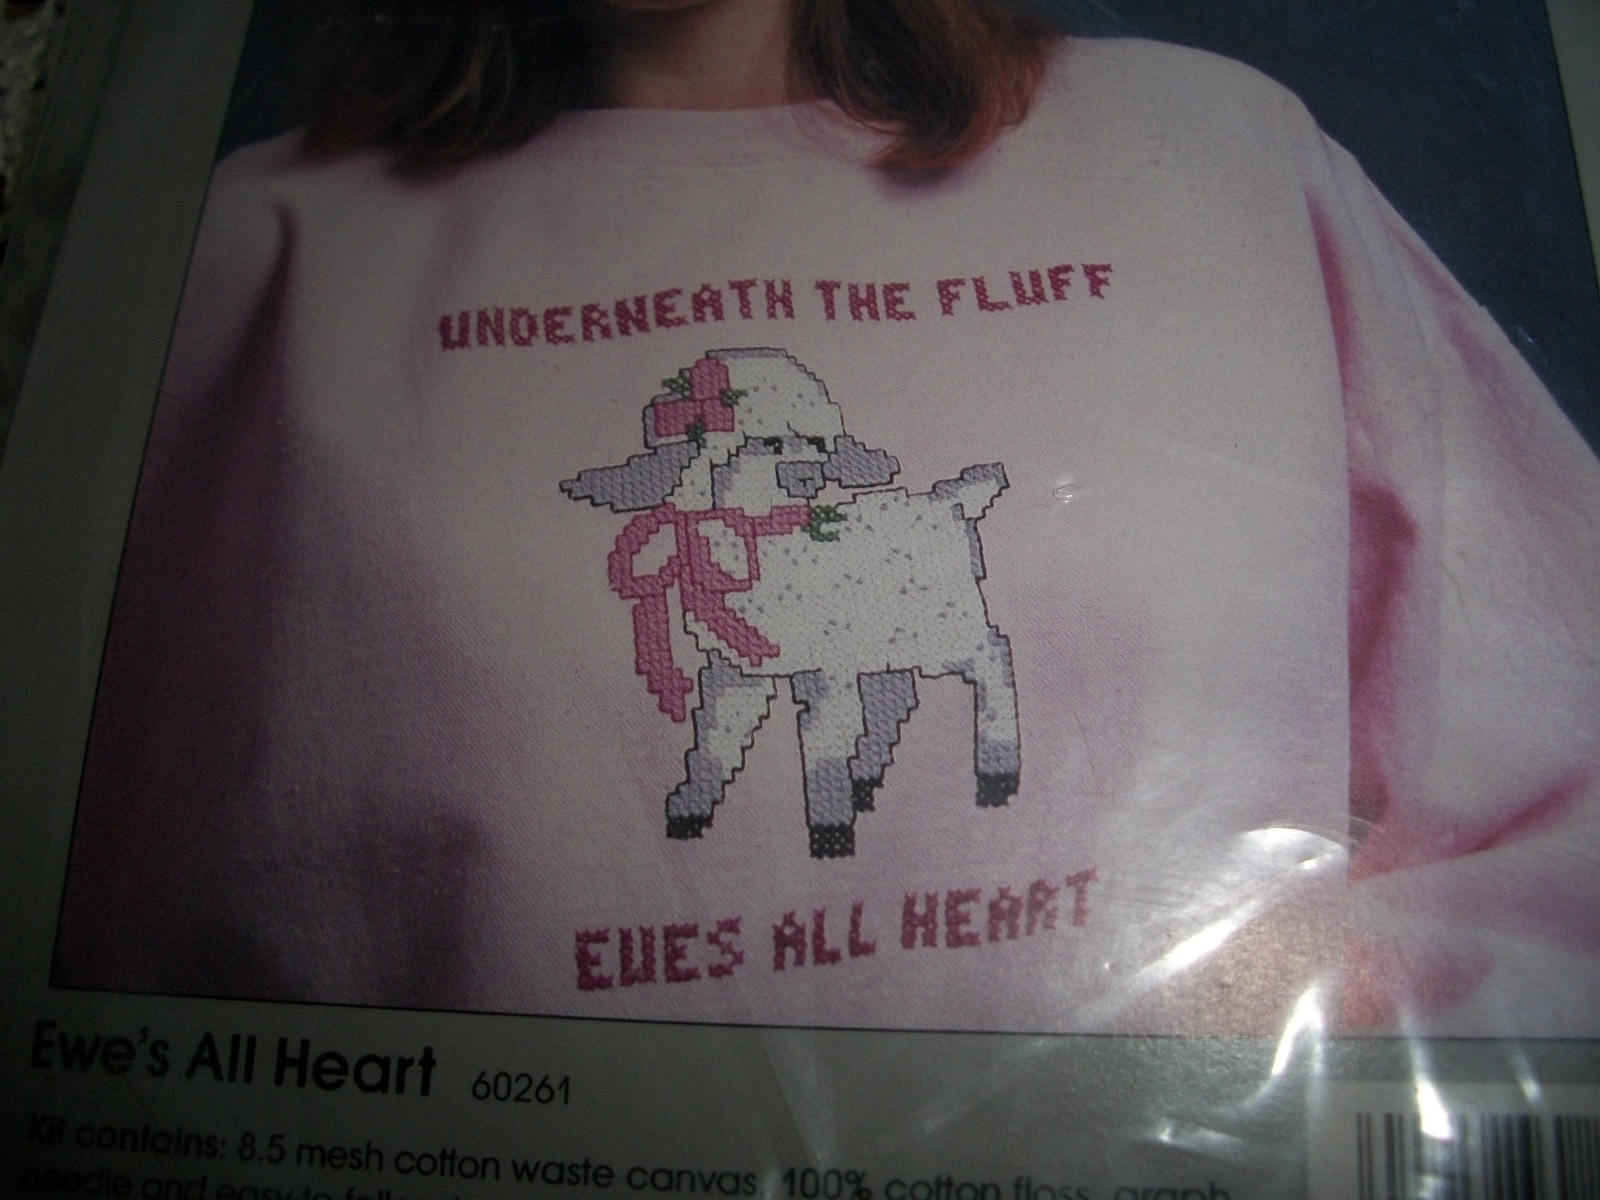 Primary image for Ewe's All Heart Wearables Cross Stitch Kit